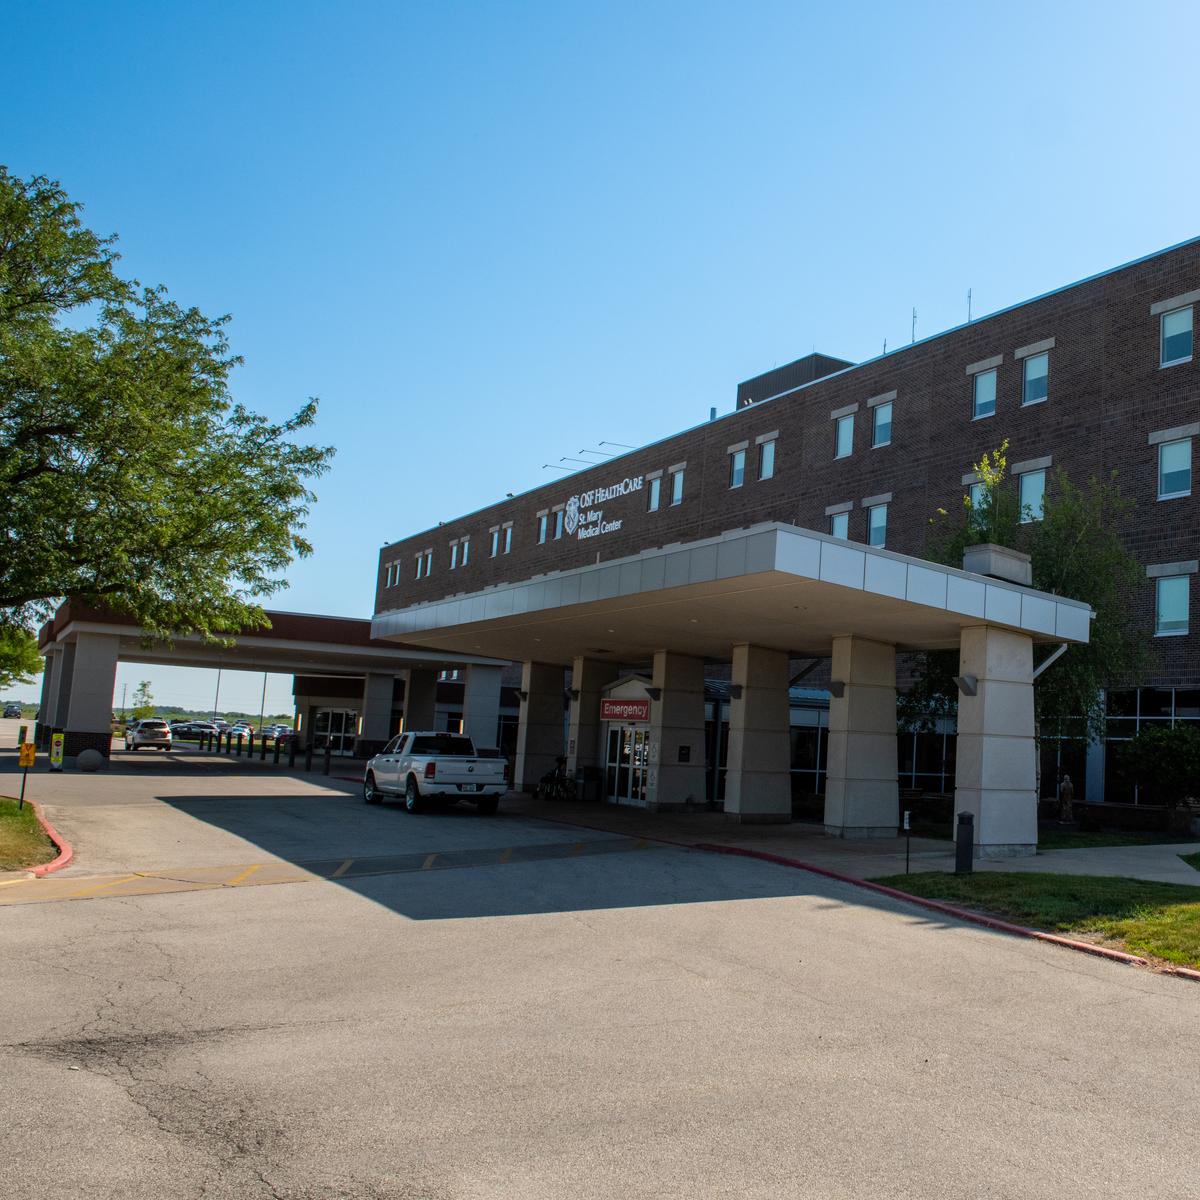 OSF St. Mary - Diagnostic Imaging, 3333 N. Seminary Street, Galesburg, Illinois, 61401